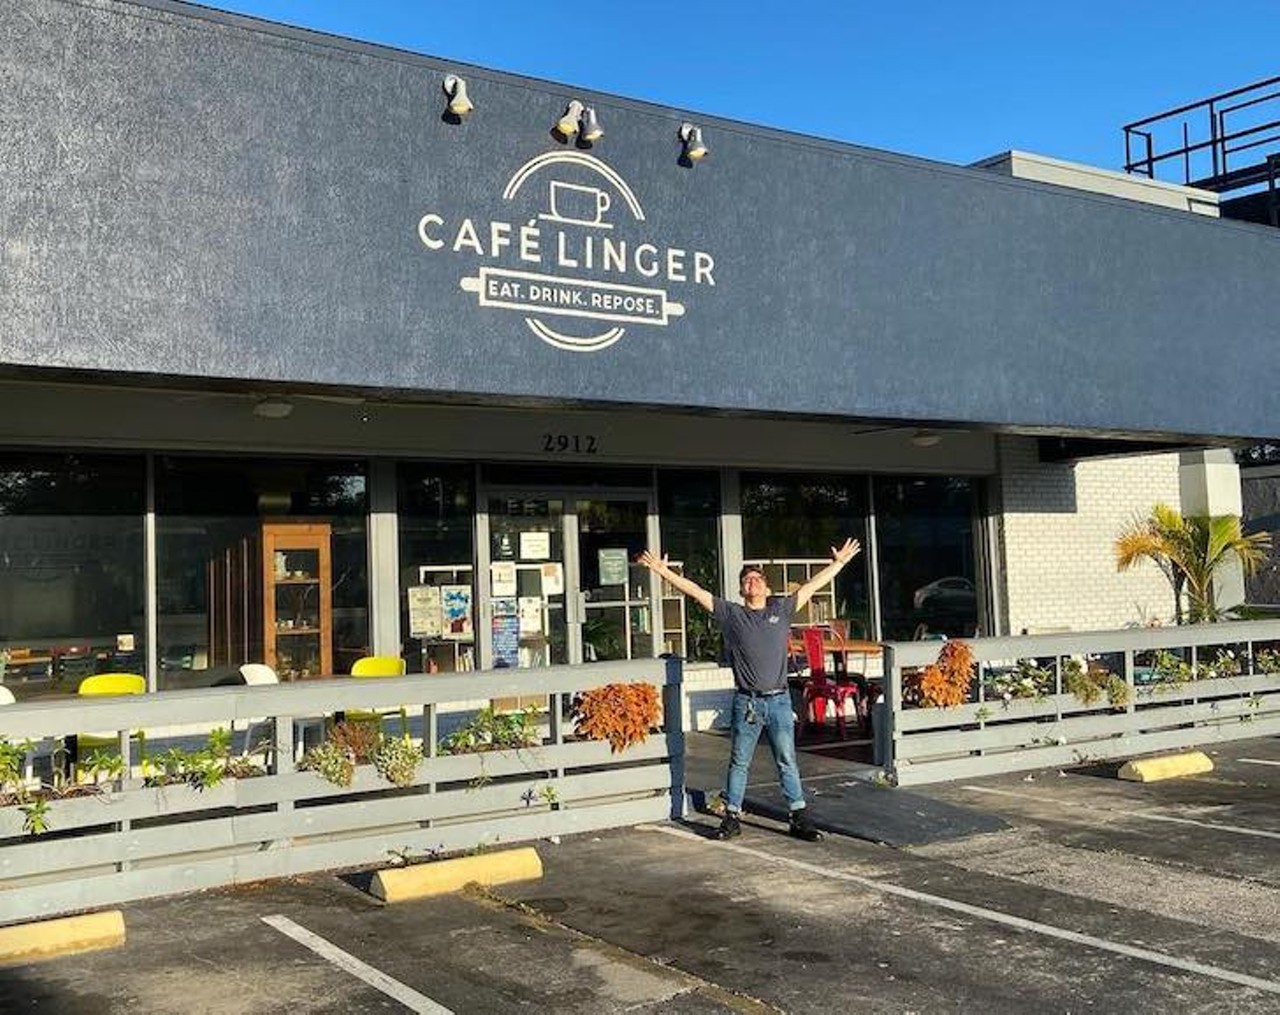 Cafe Linger 
2912 Edgewater Drive, Florida 32804, 407- 930-0473
Offering food, coffee, tea and alcoholic beverages for carry out, delivery and curbside pickup. 
Photo via Cafe Linger/Facebook